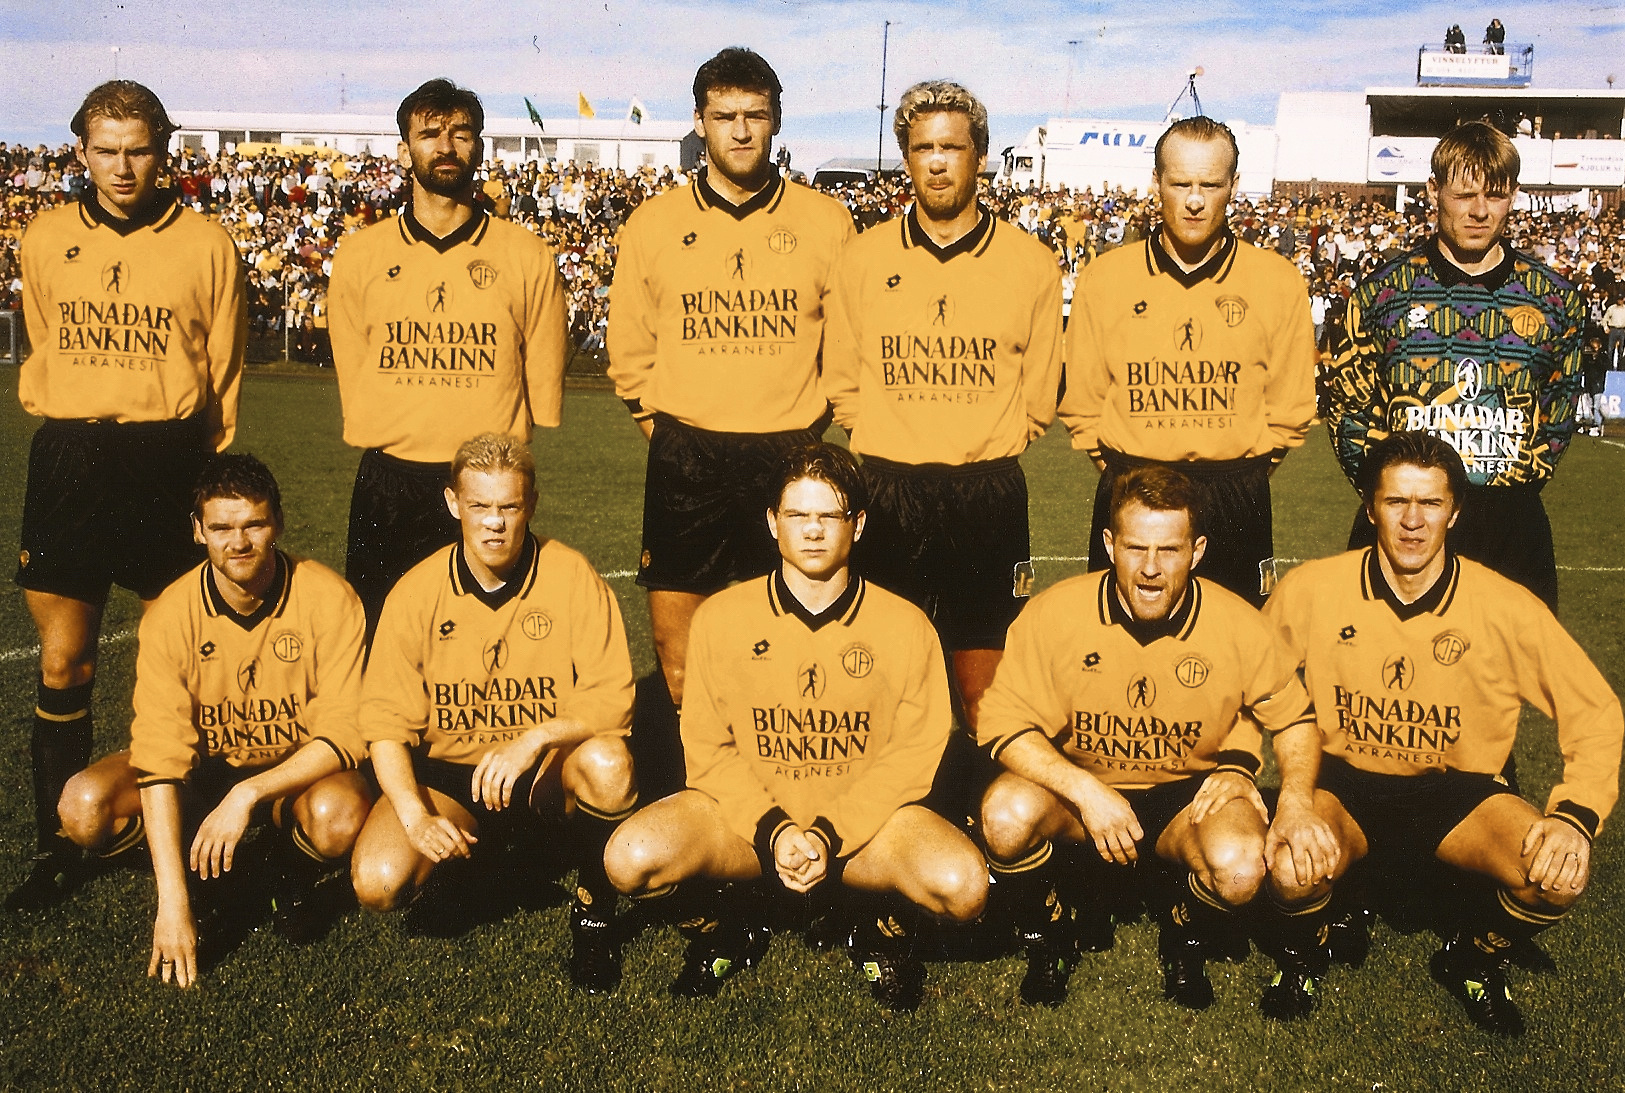 The melancholy romance of ÍA, the club that once ruled Iceland through thick and thin